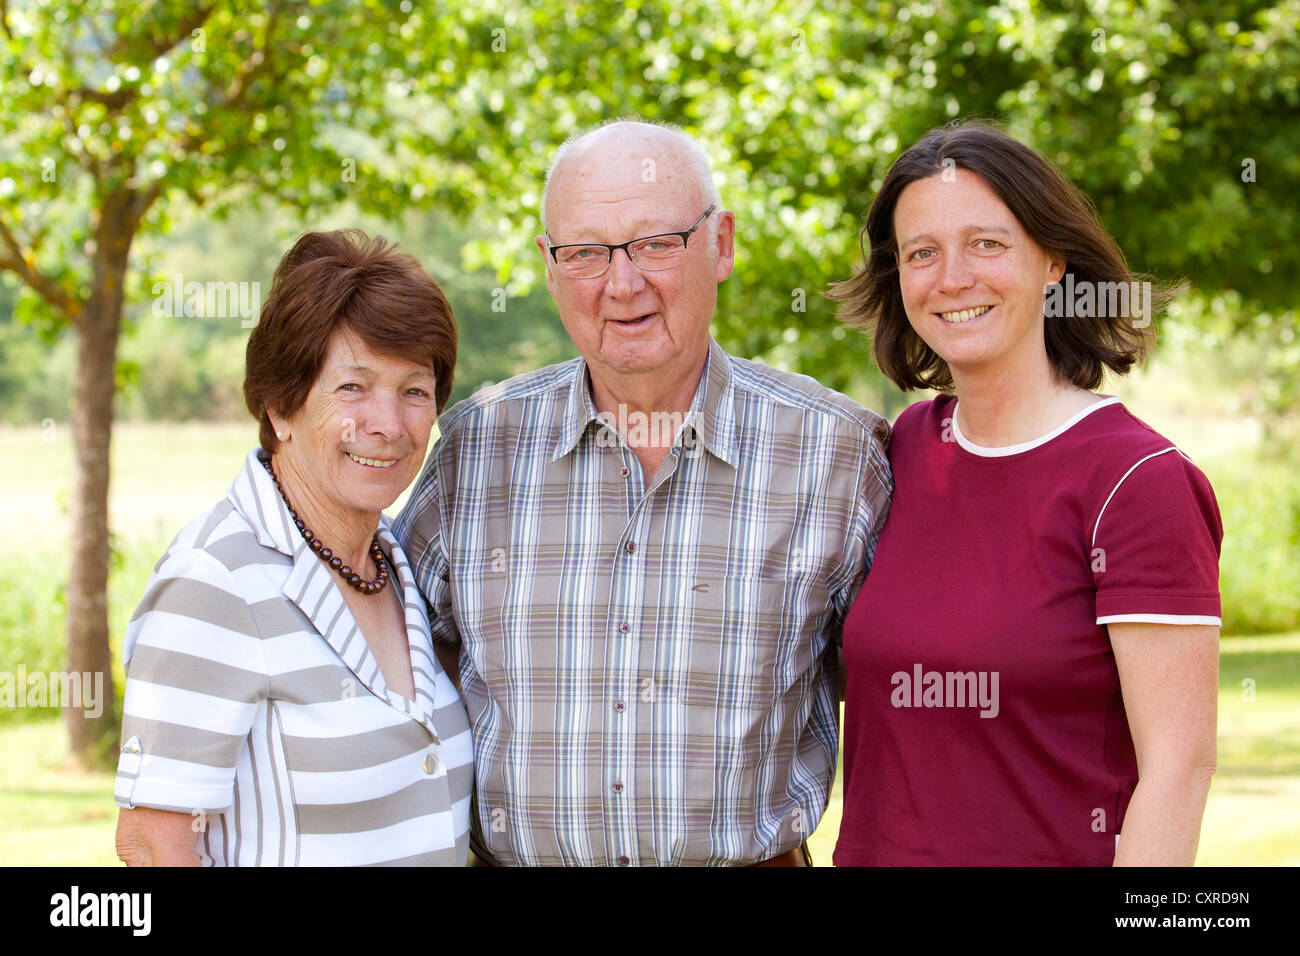 Elderly couple, retirees, 70-80 years old, with their daughter, 40-50 years old, Bengel, Rhineland-Palatinate, Germany, Europe Stock Photo